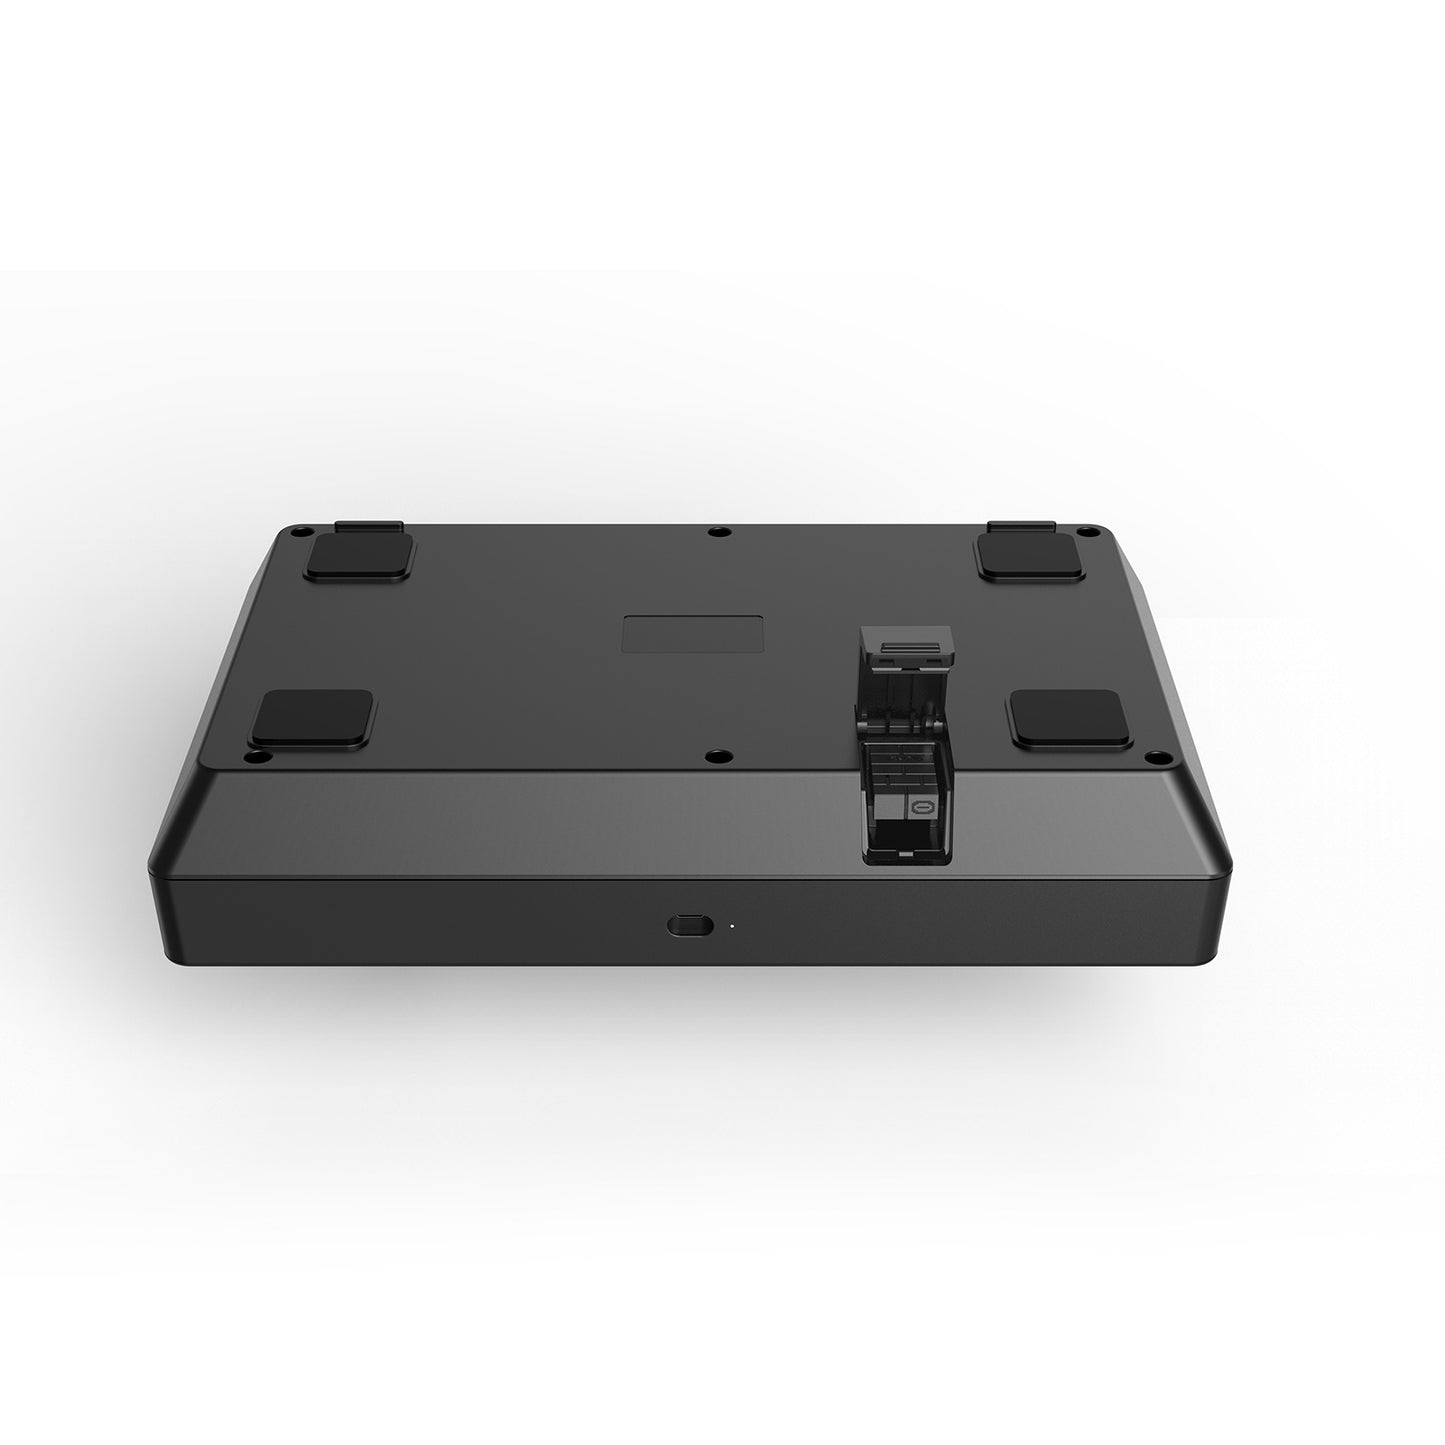 8BitDo Introduces Officially Licensed Wireless Arcade Stick for Xbox,  Launches June 30 - TechEBlog